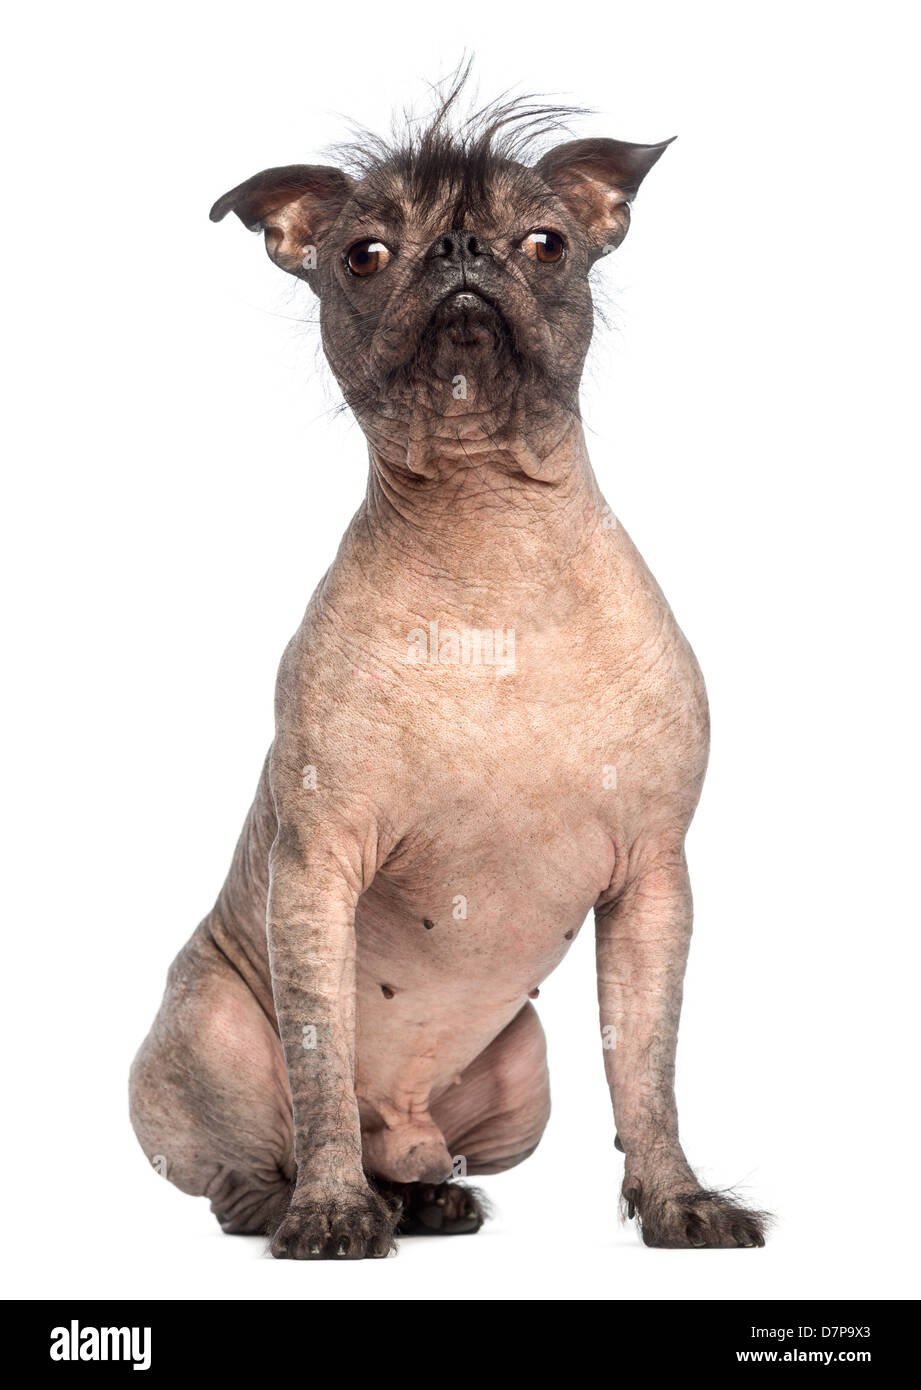 Hairless Mixed breed, a cross between a French Bulldog and Chinese Crested Dog, portrait against white background Stock Photo